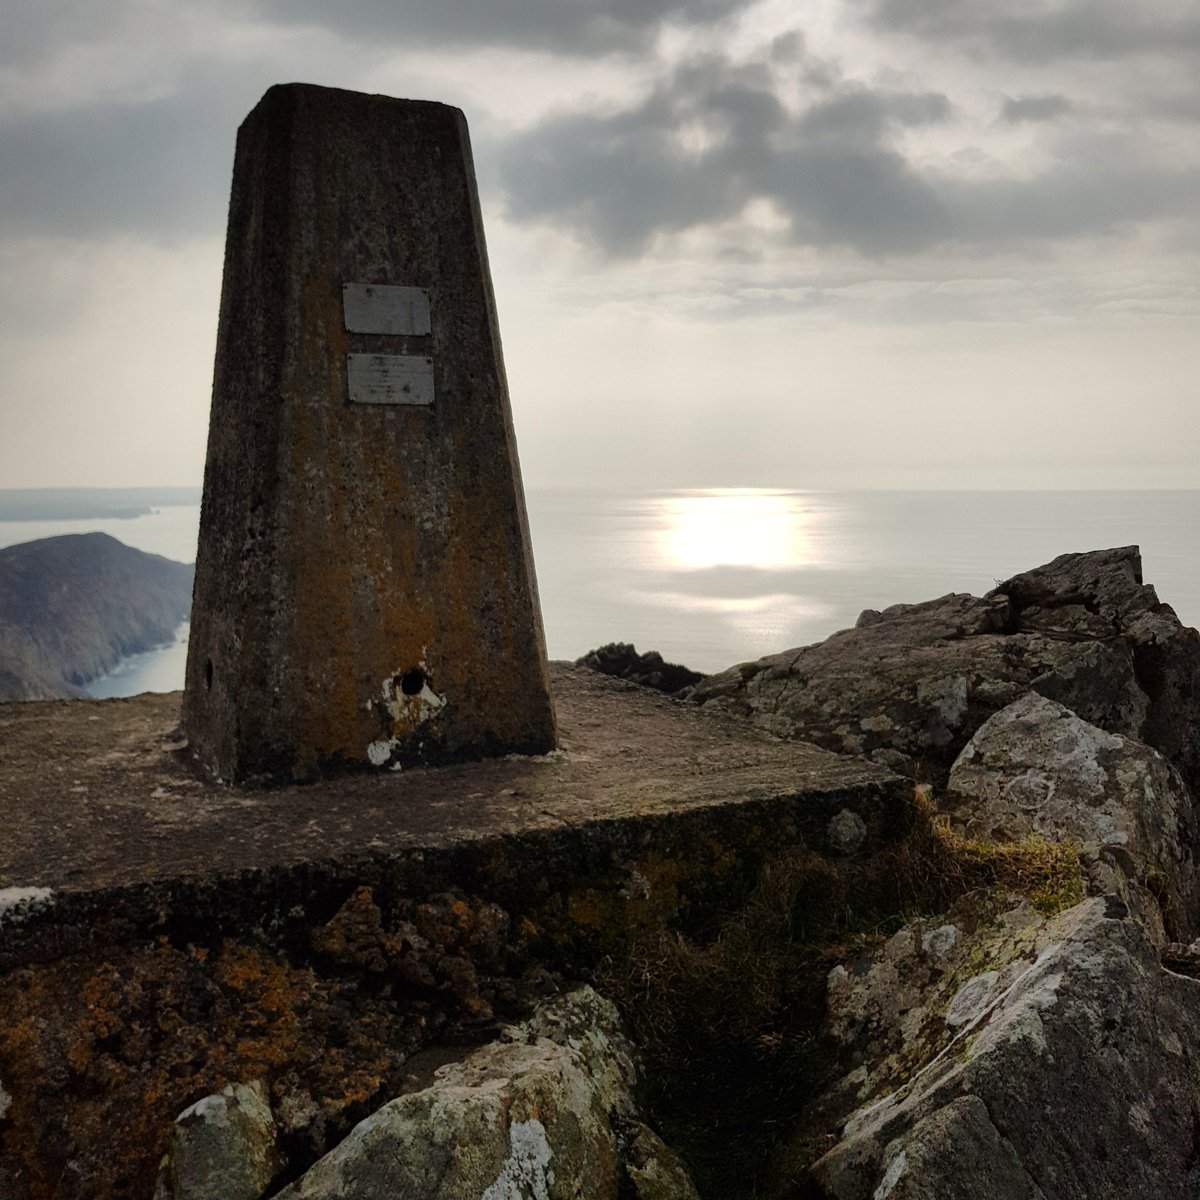 Bagged our first #trigpoint in Wales yesterday just as the sun was setting. Beutiful end to our first night in #Pembrokeshire, thank you  #GarnFawr.